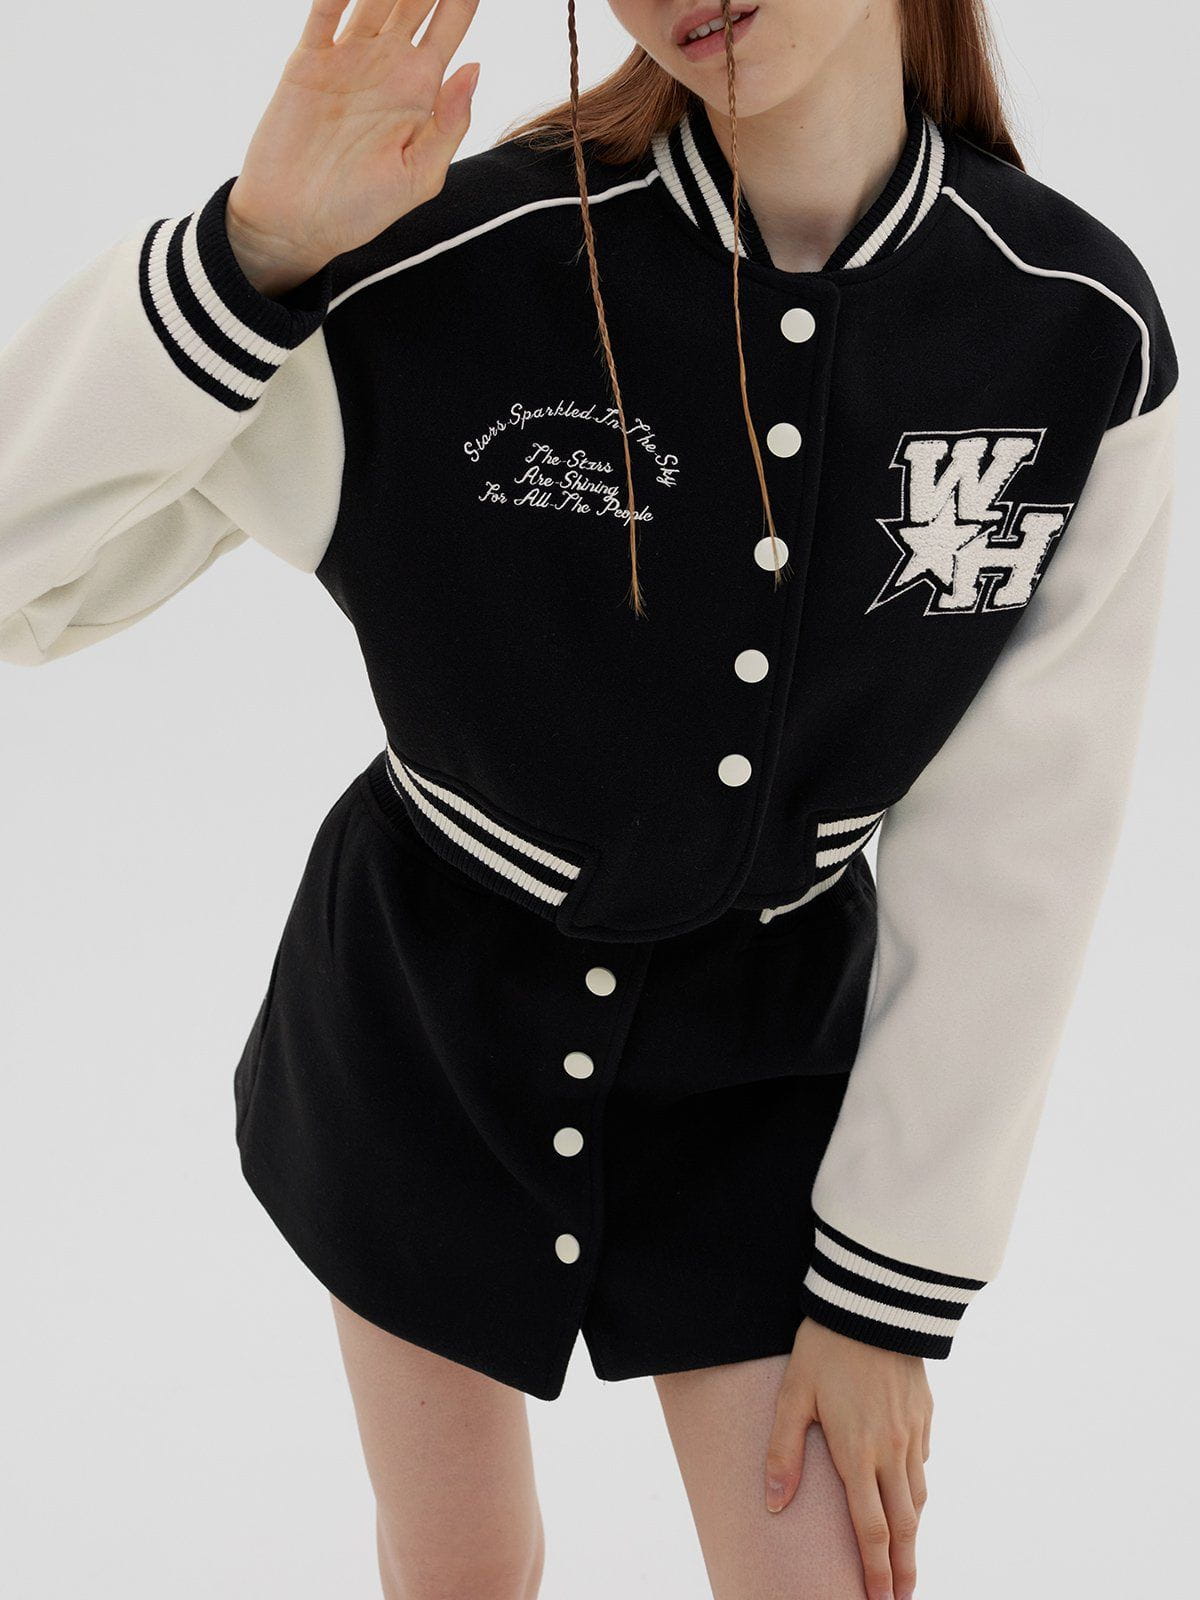 "WH" Embroidered Cropped Varsity Jacket Streetwear Brand Techwear Combat Tactical YUGEN THEORY